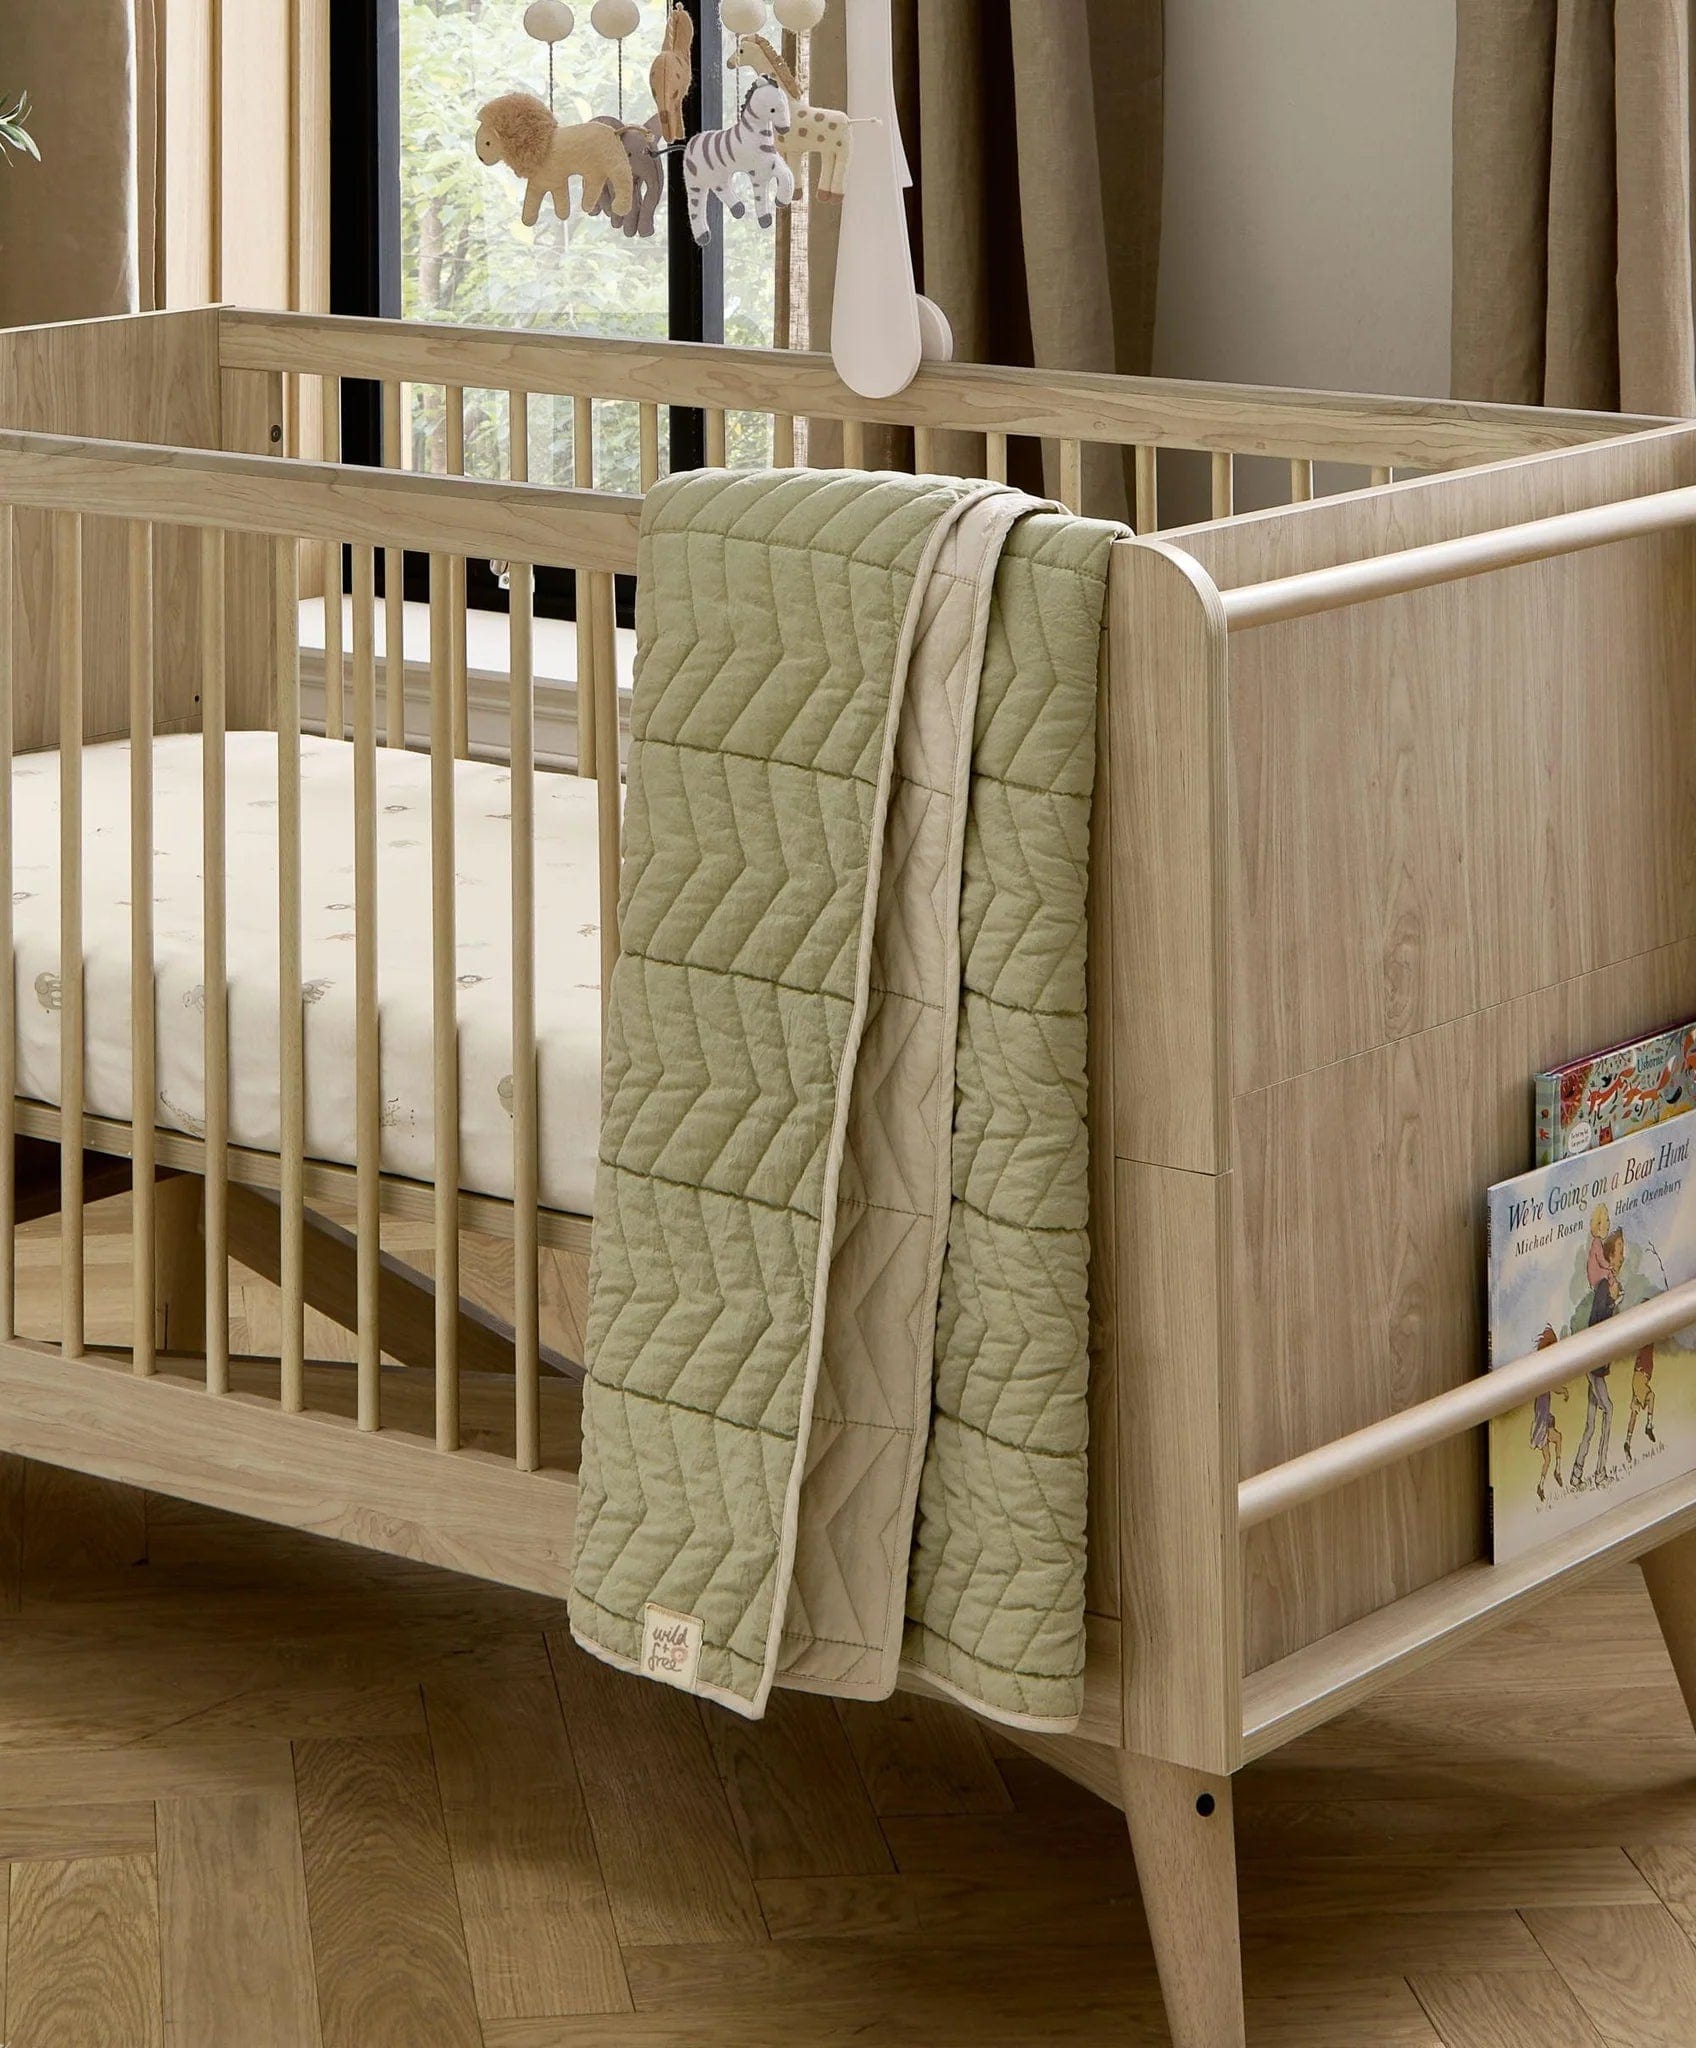 M&P Welcome to the World Cot Bed Quilt in Born to be wild 7041tg300 5057232789284